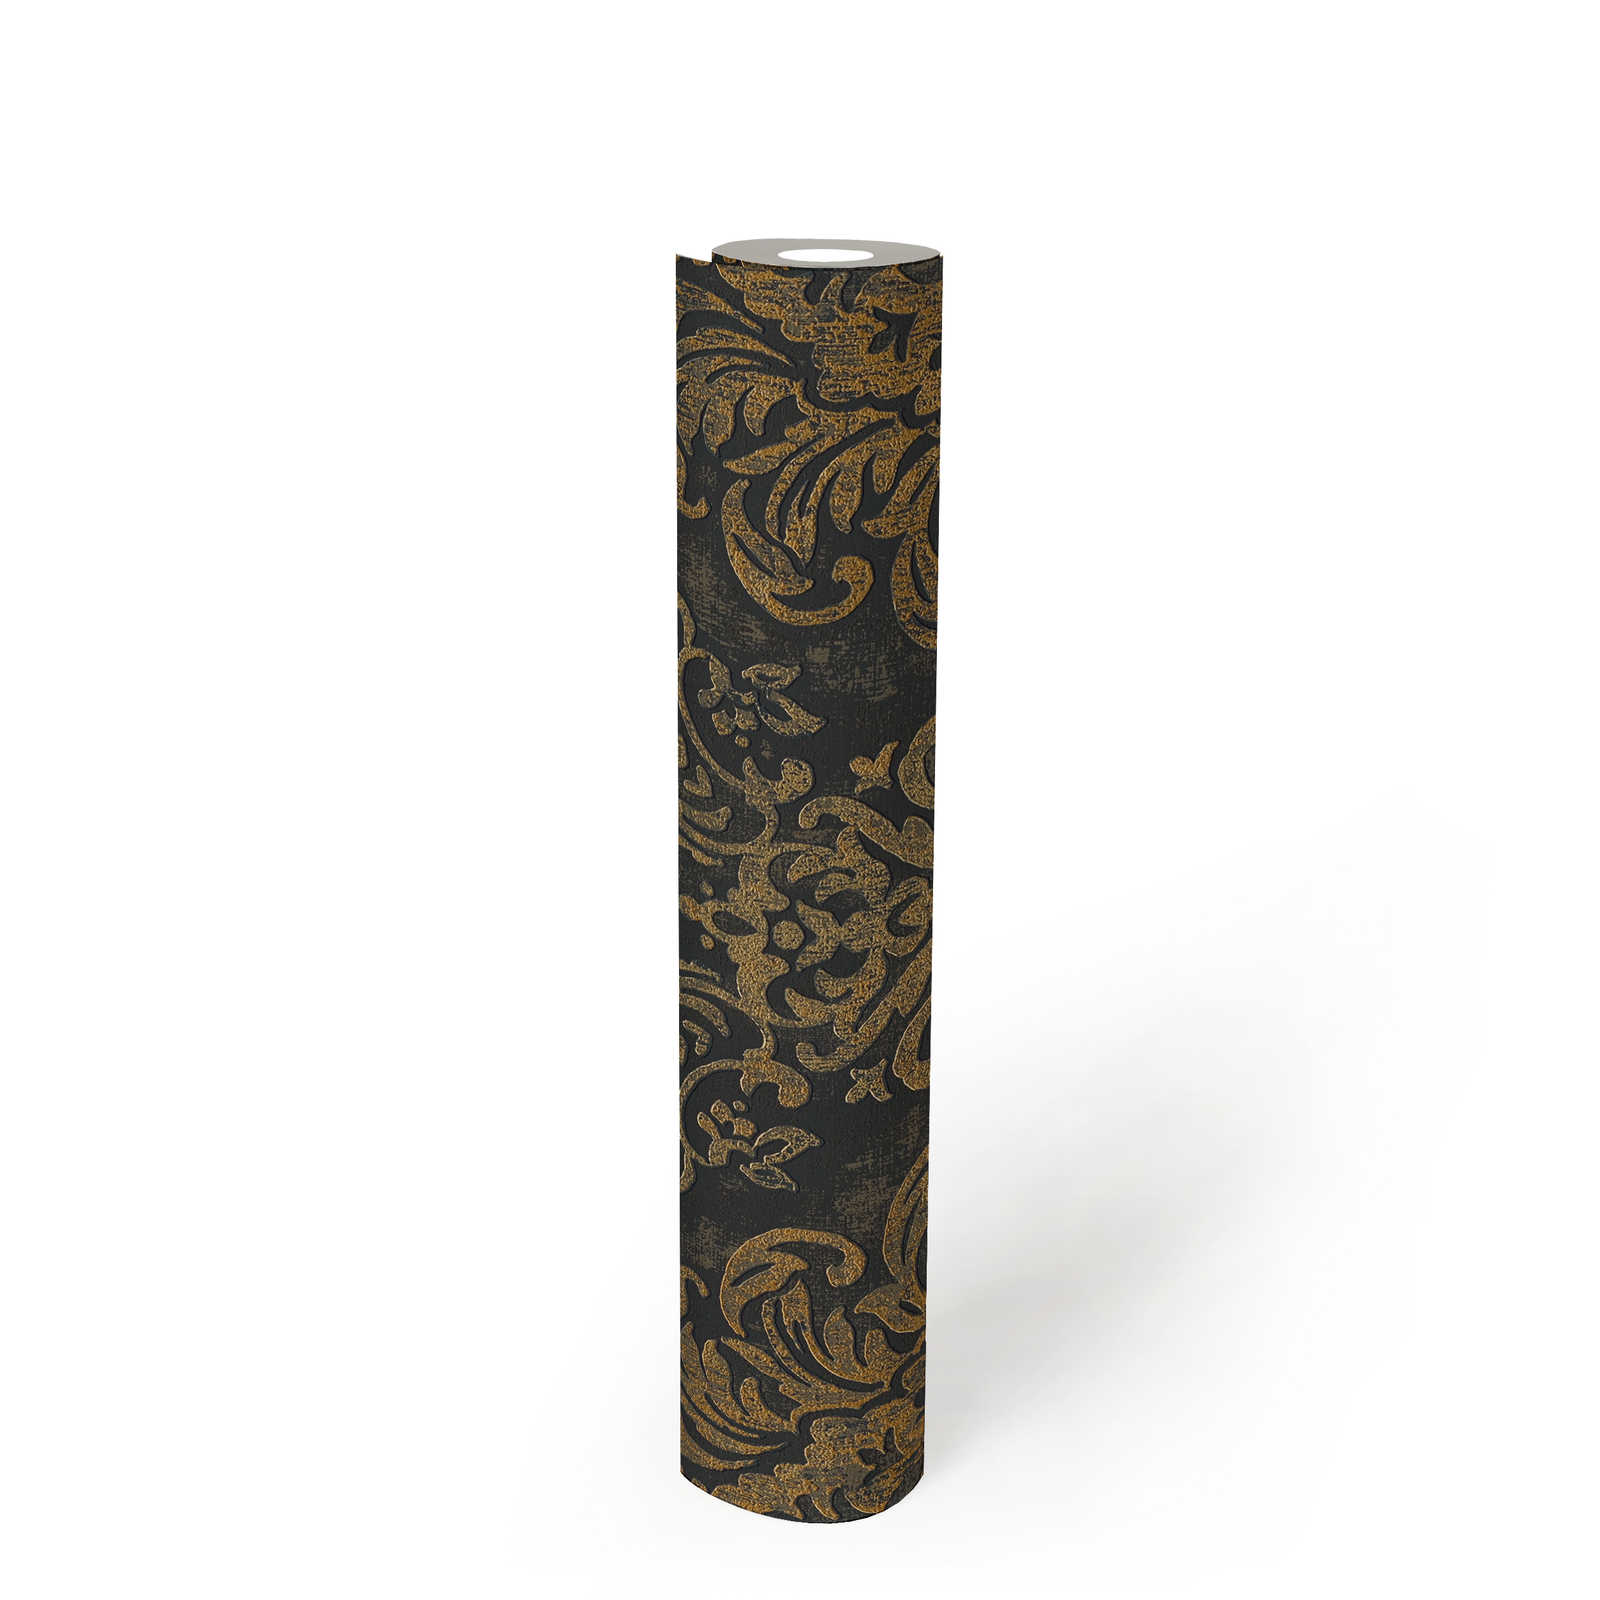             Non-woven wallpaper with baroque ornaments & metallic used look - black, gold
        